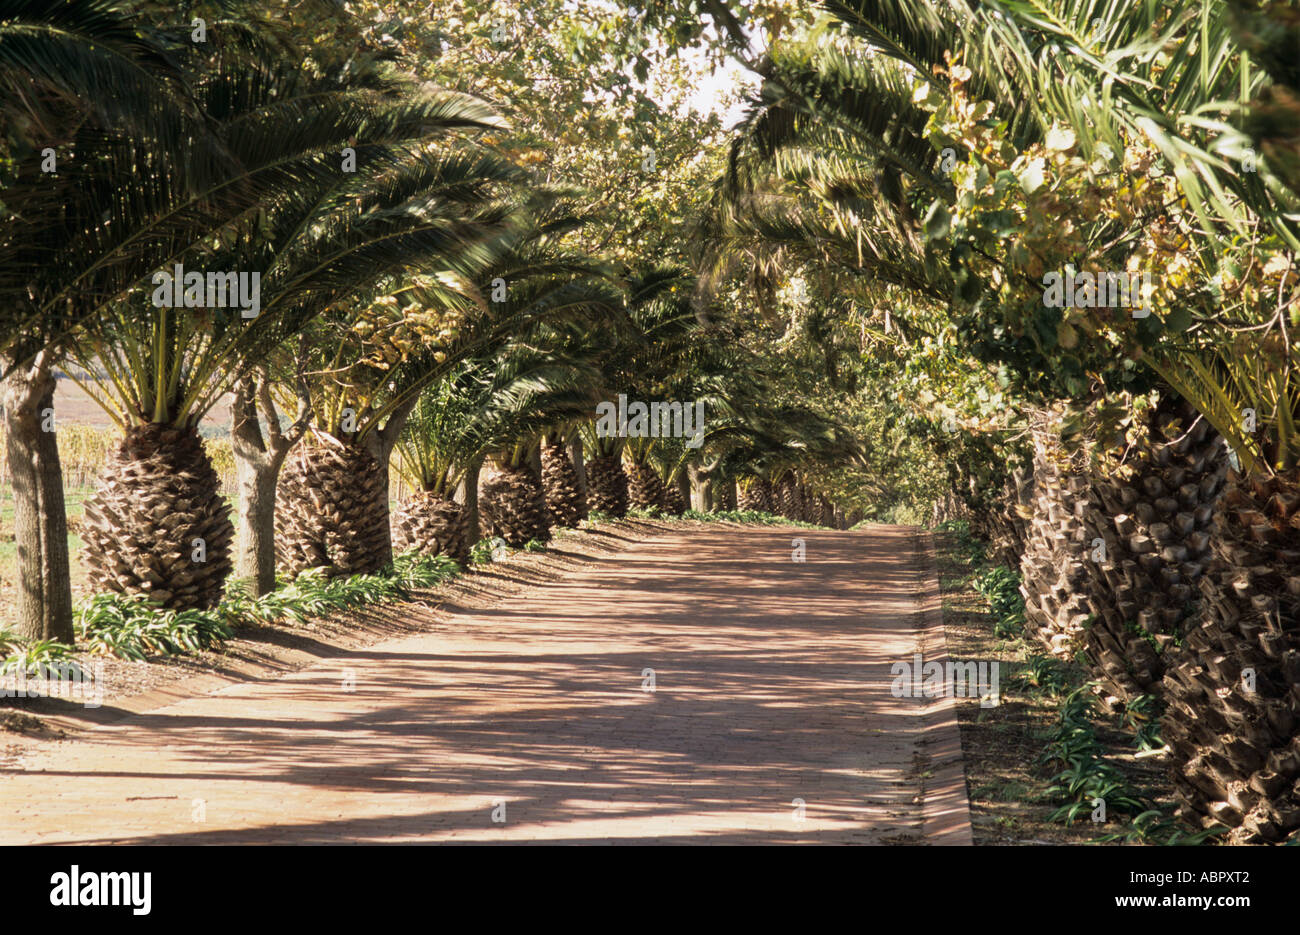 Palm lined avenue in South Africa Stock Photo